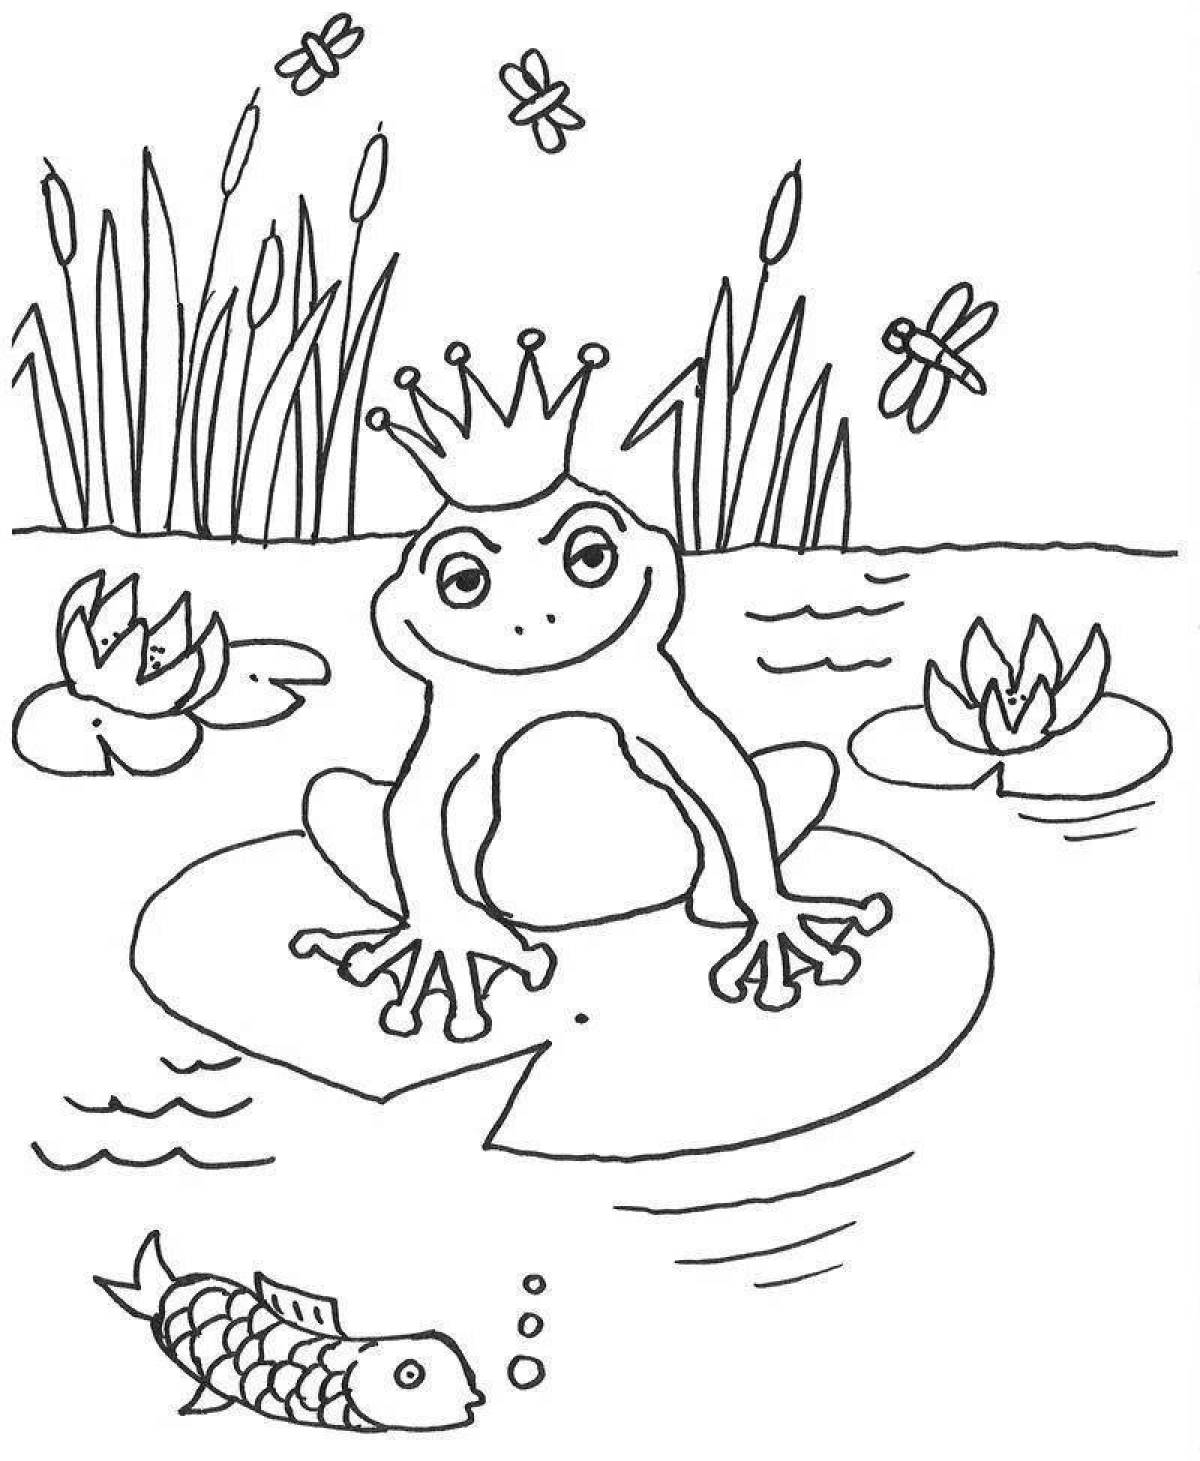 Colorful frog princess coloring pages for kids